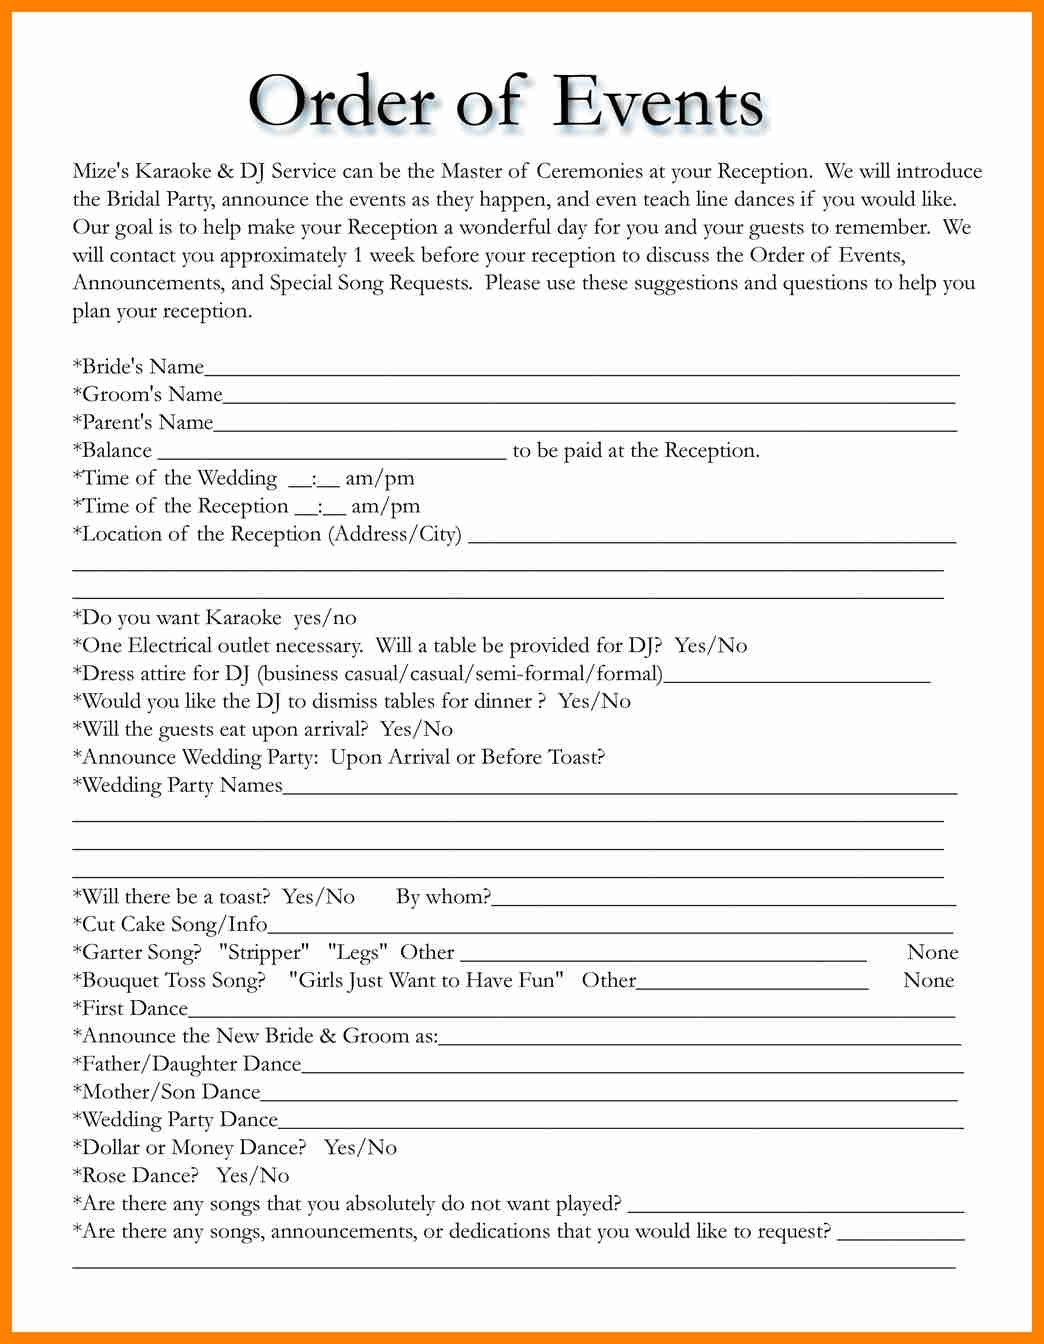 Ideadhezzdj On Wedding | Wedding Reception Timeline intended for Wedding Party Itinerary Template